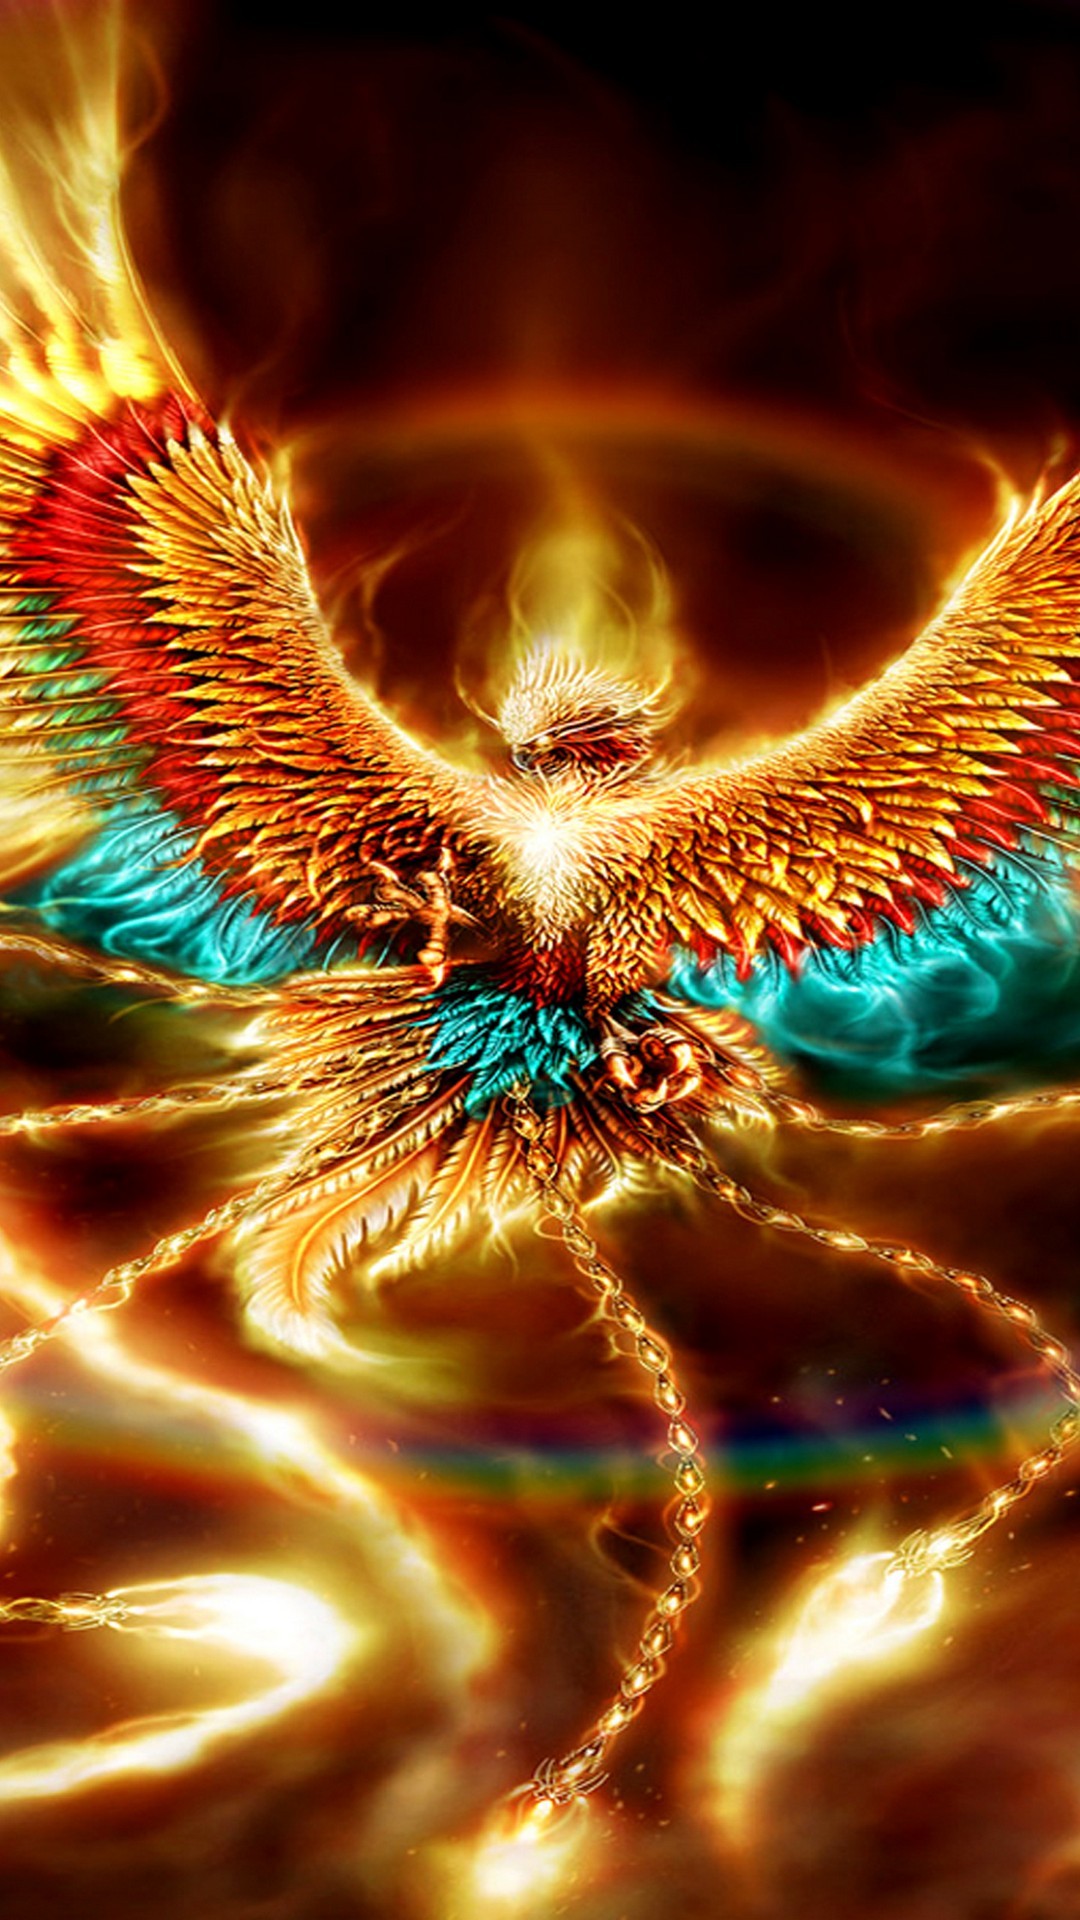 Phoenix Wallpaper For iPhone with image resolution 1080x1920 pixel. You can make this wallpaper for your iPhone 5, 6, 7, 8, X backgrounds, Mobile Screensaver, or iPad Lock Screen